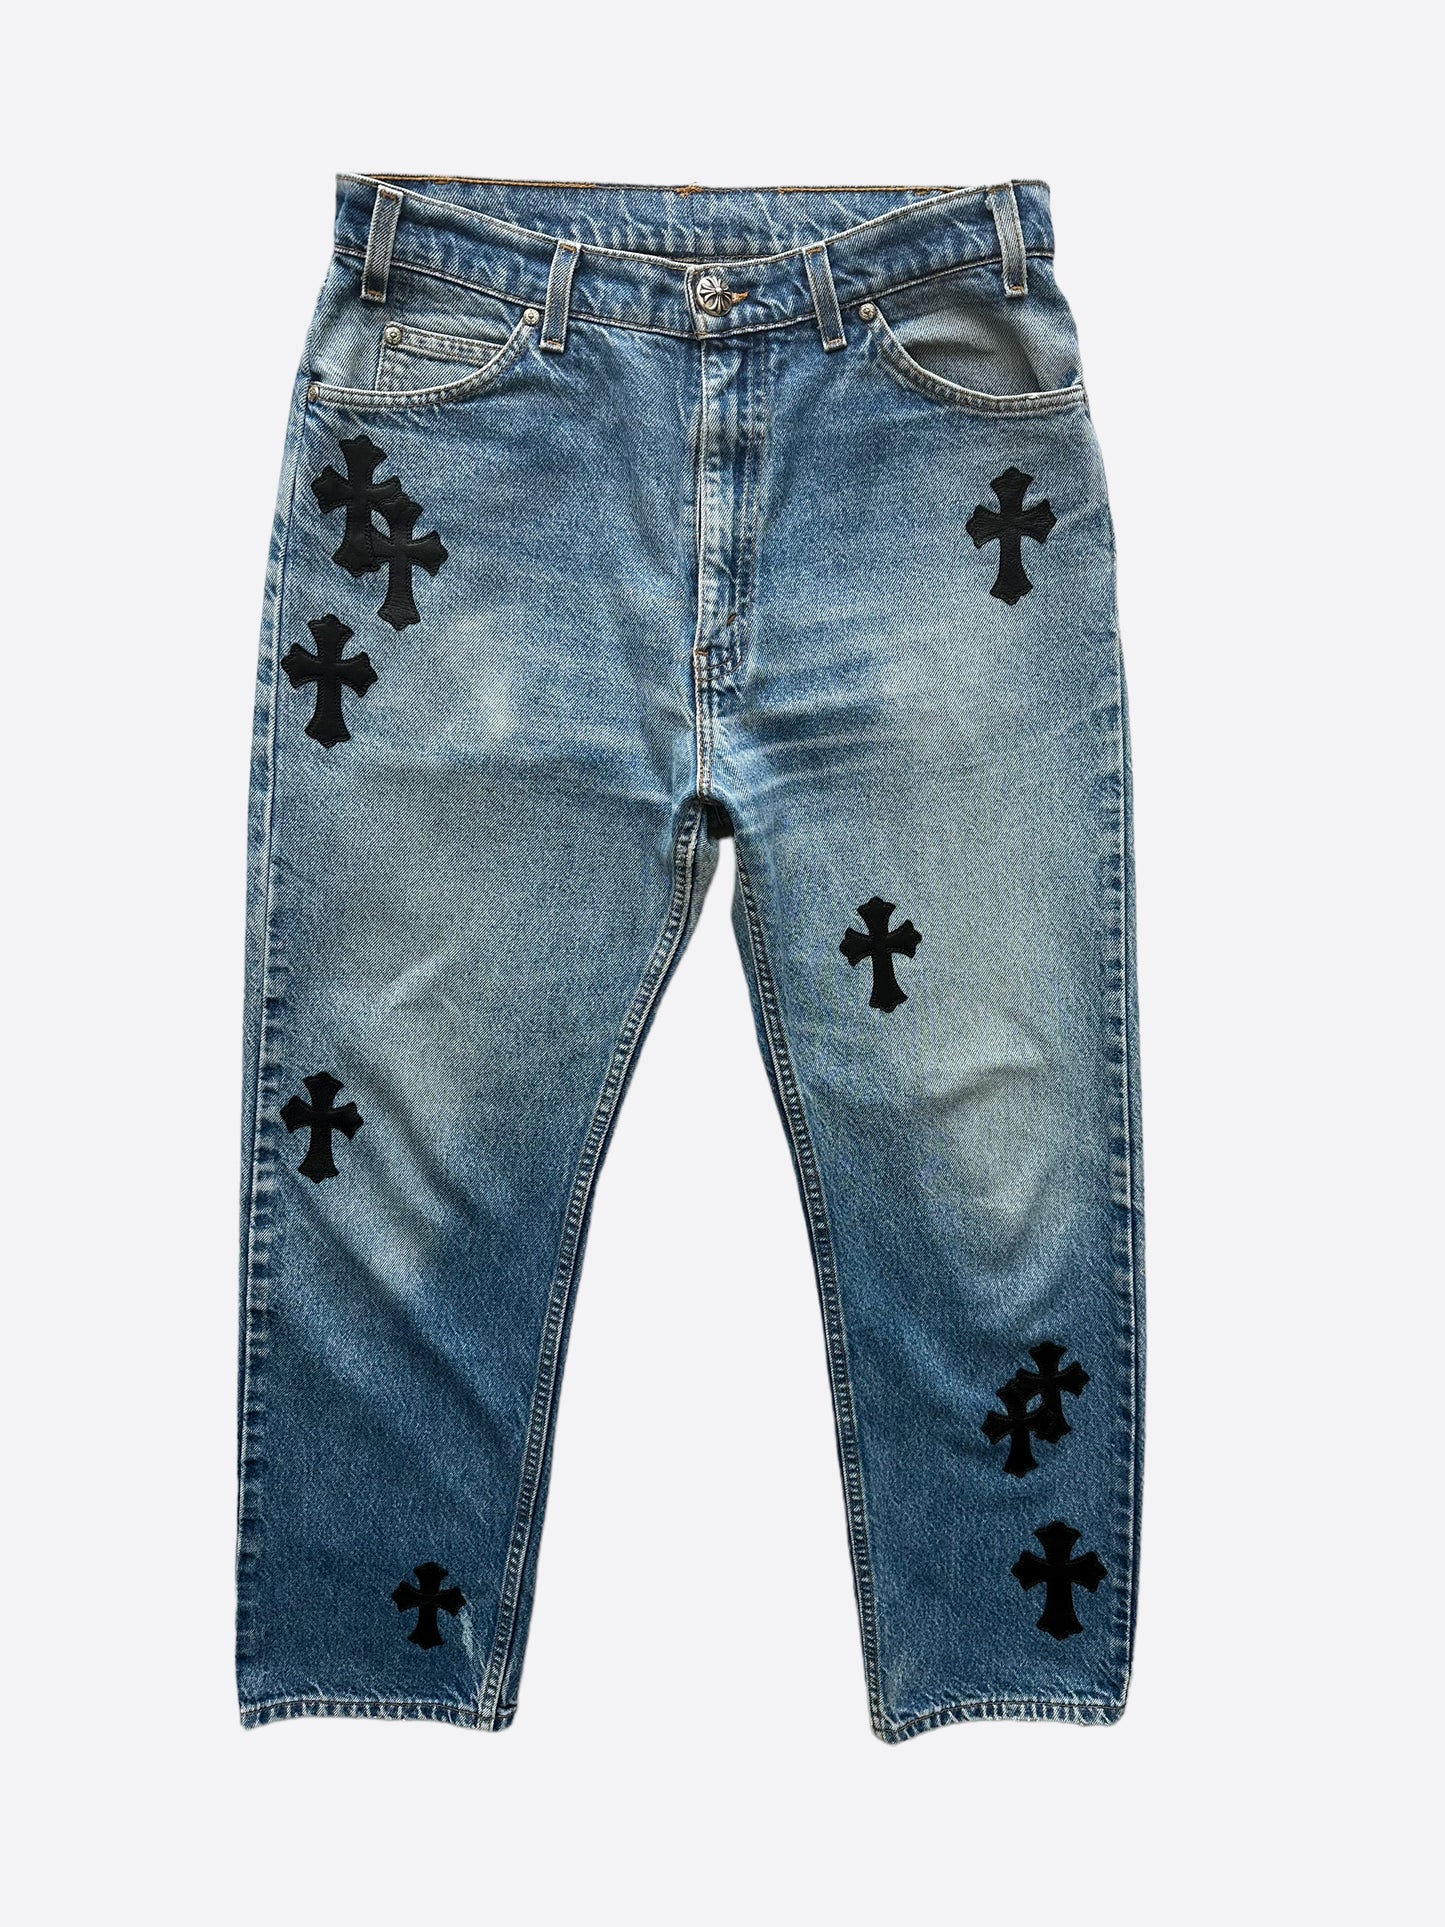 A limited edition of the Chrome Hearts Patch Leather Cross Jeans